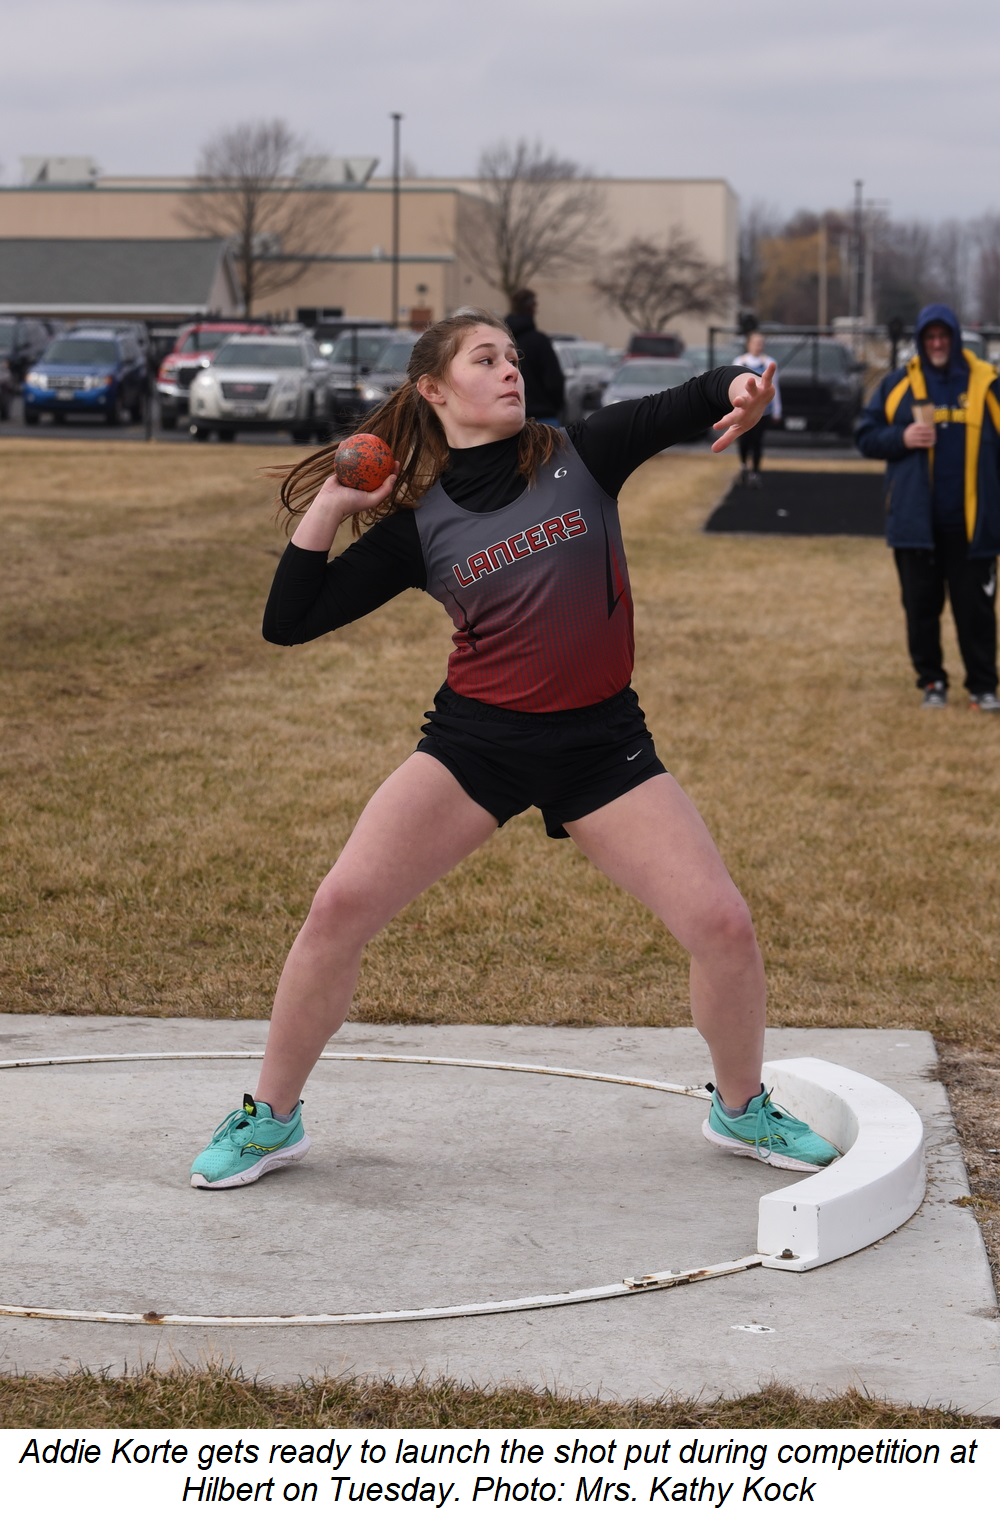 Addie Korte gets ready to launch the shot put during competition at Hilbert Tuesday.